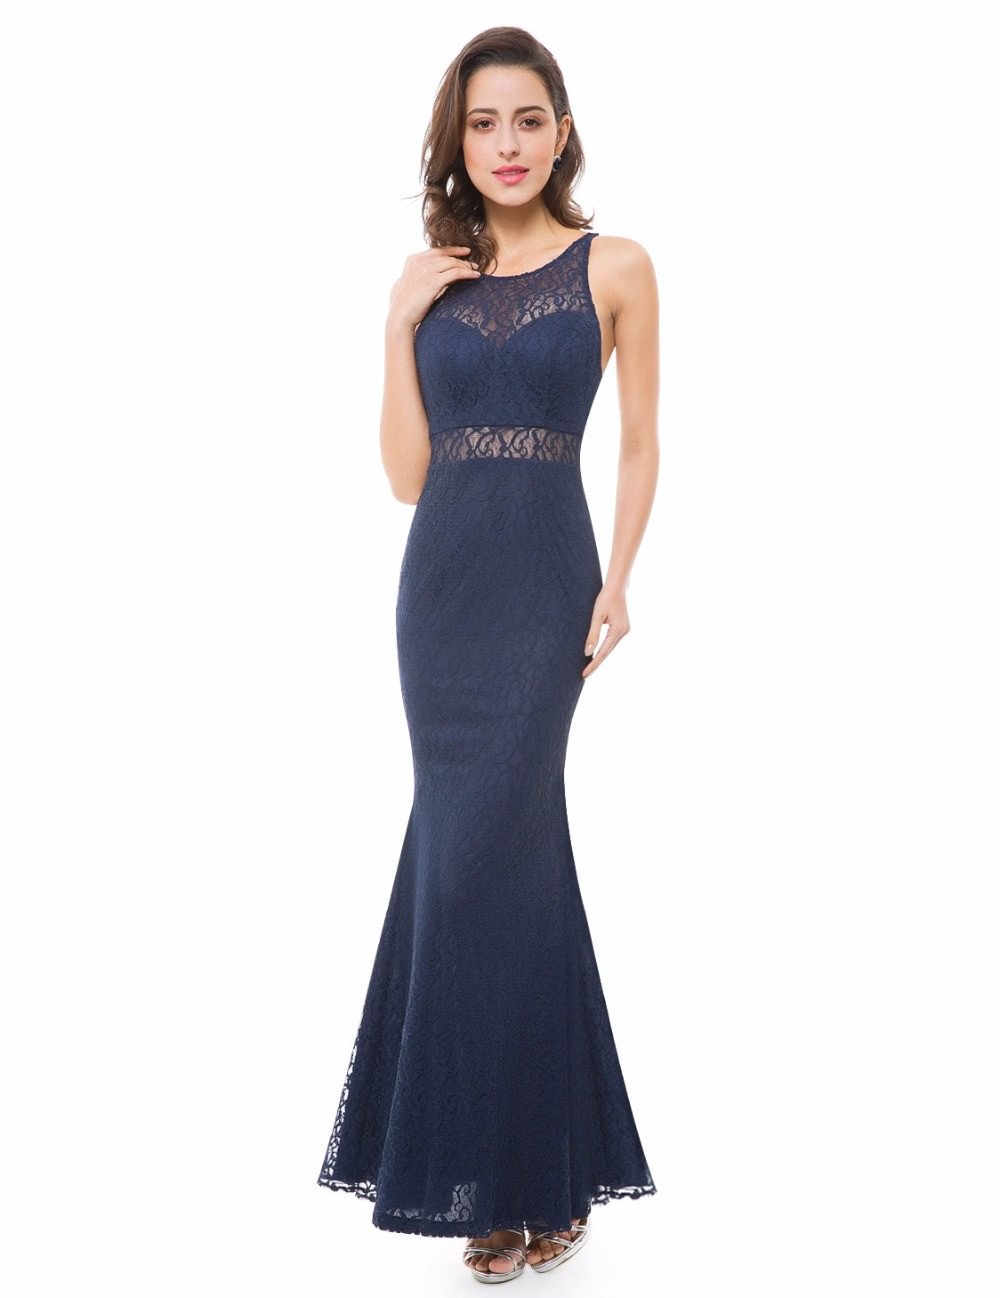 Gorgeous Navy Lace Dresses Mermaid Long Evening Party Gowns